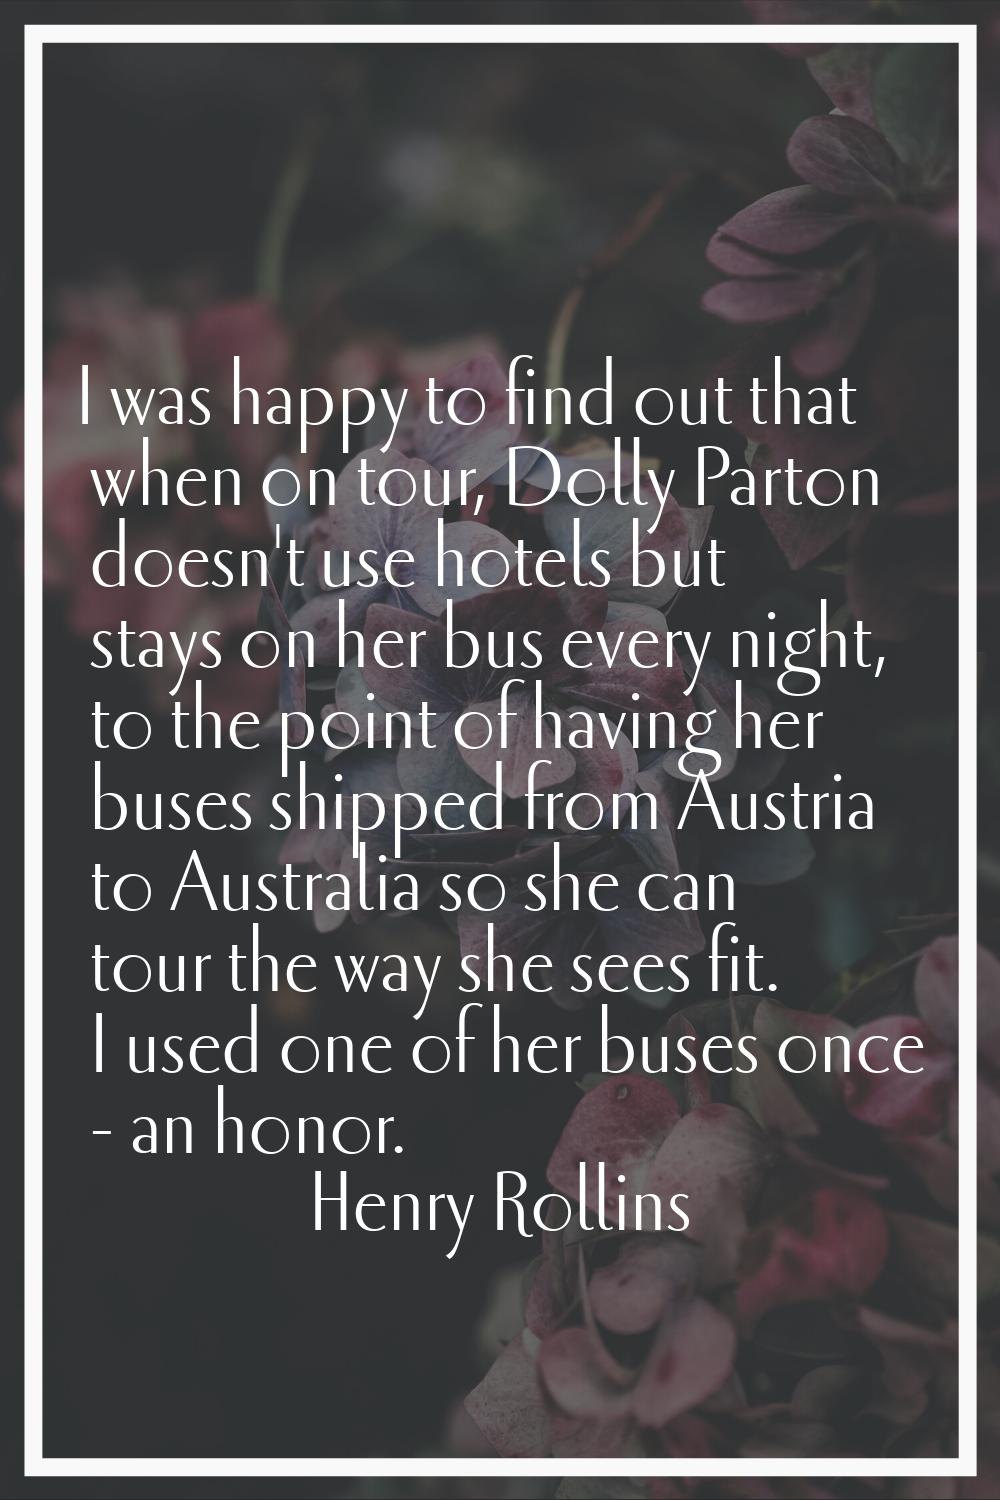 I was happy to find out that when on tour, Dolly Parton doesn't use hotels but stays on her bus eve